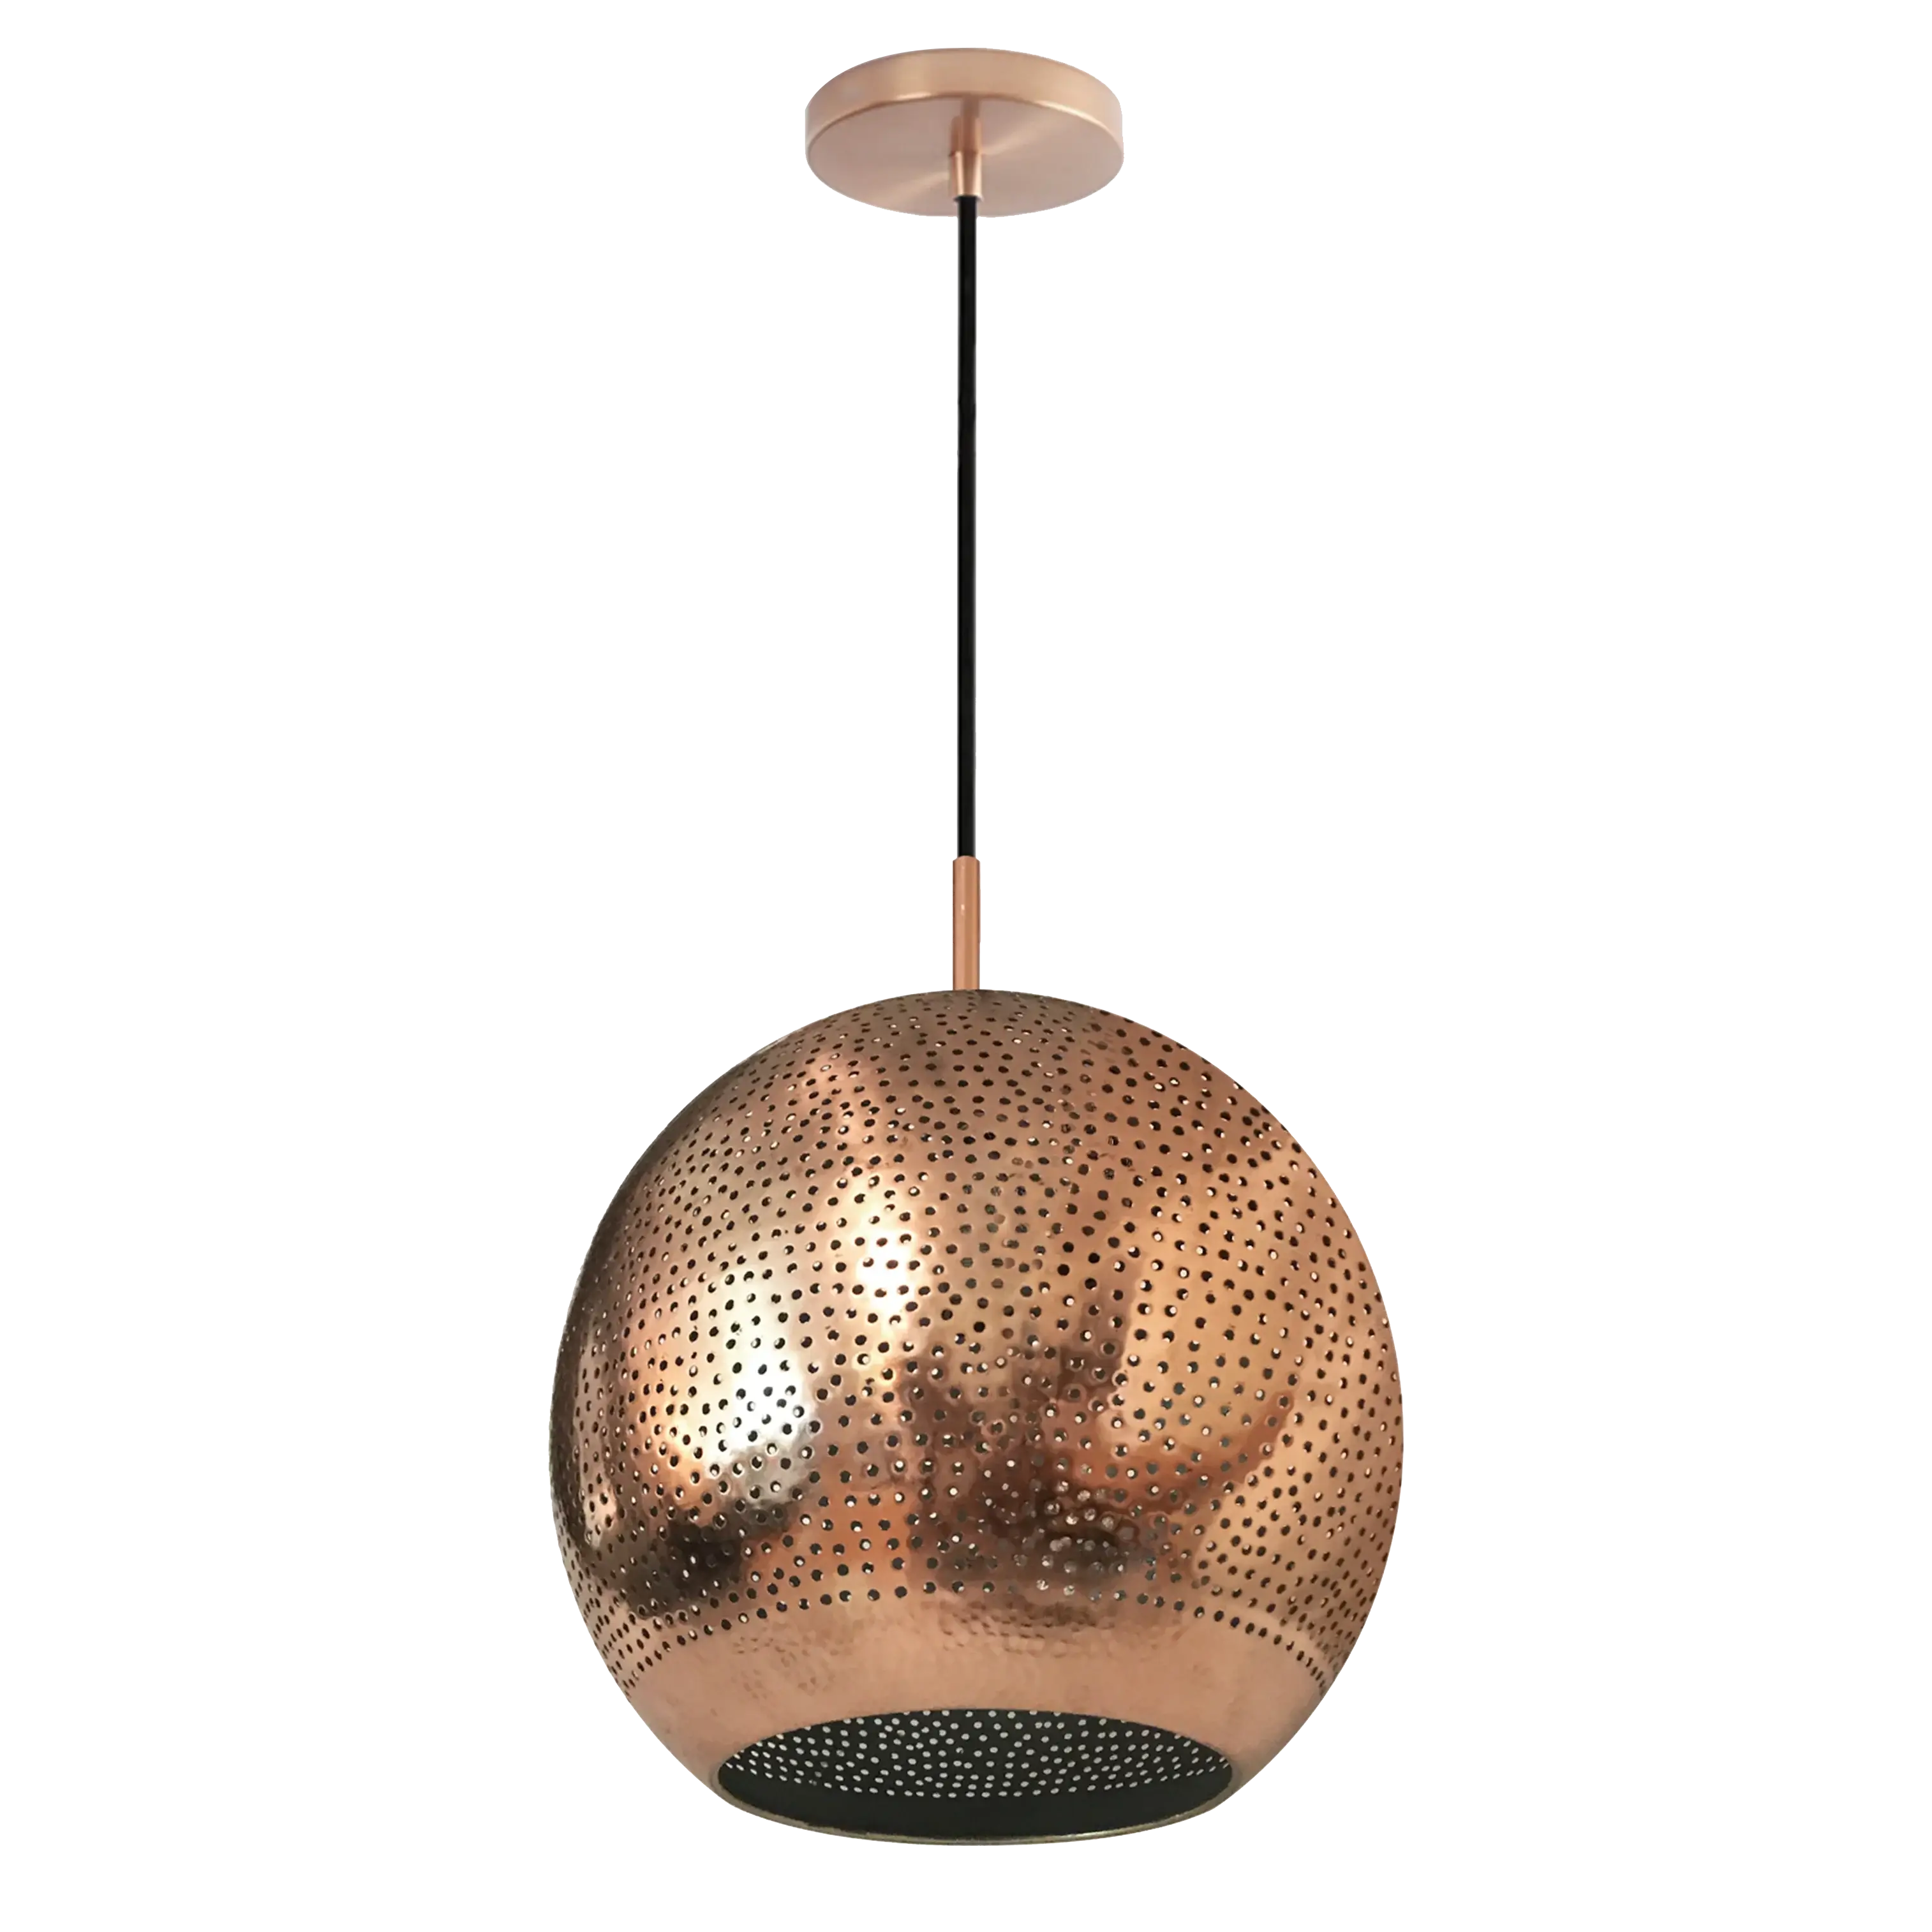 Dounia home Pendant light in Polished copper made of Metal, Model: Shams